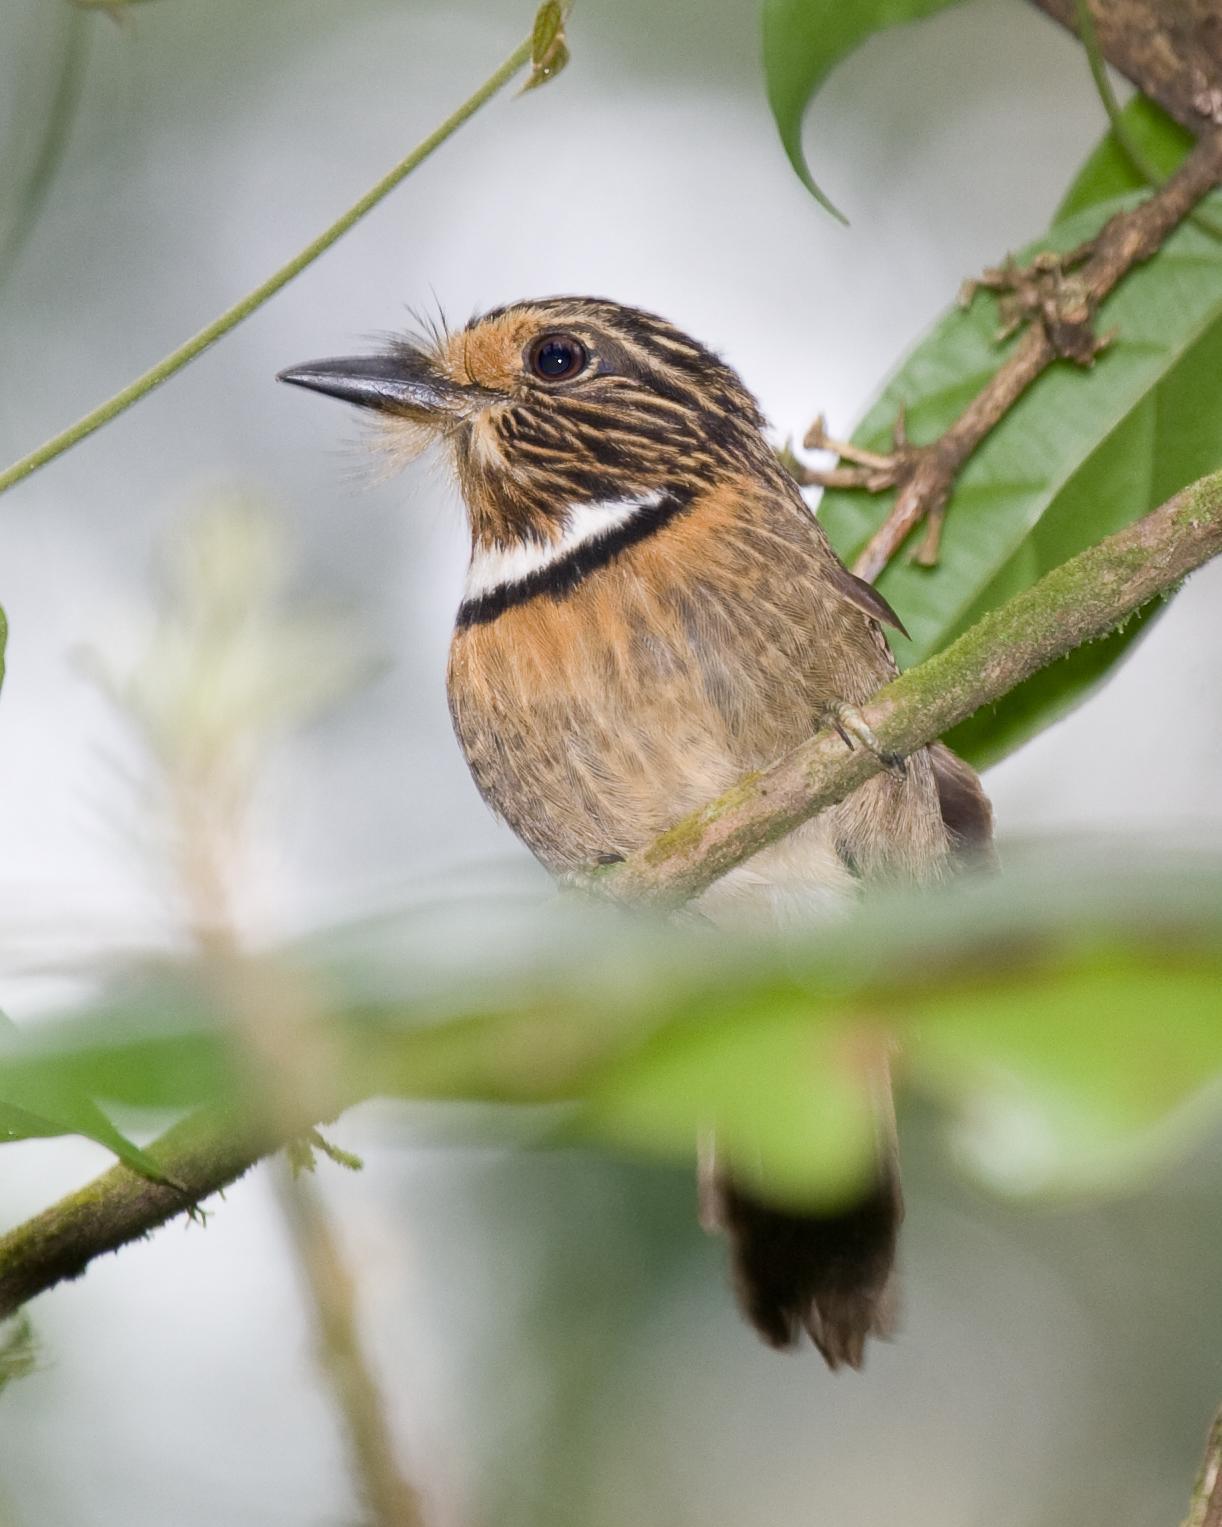 Crescent-chested Puffbird Photo by Robert Lewis